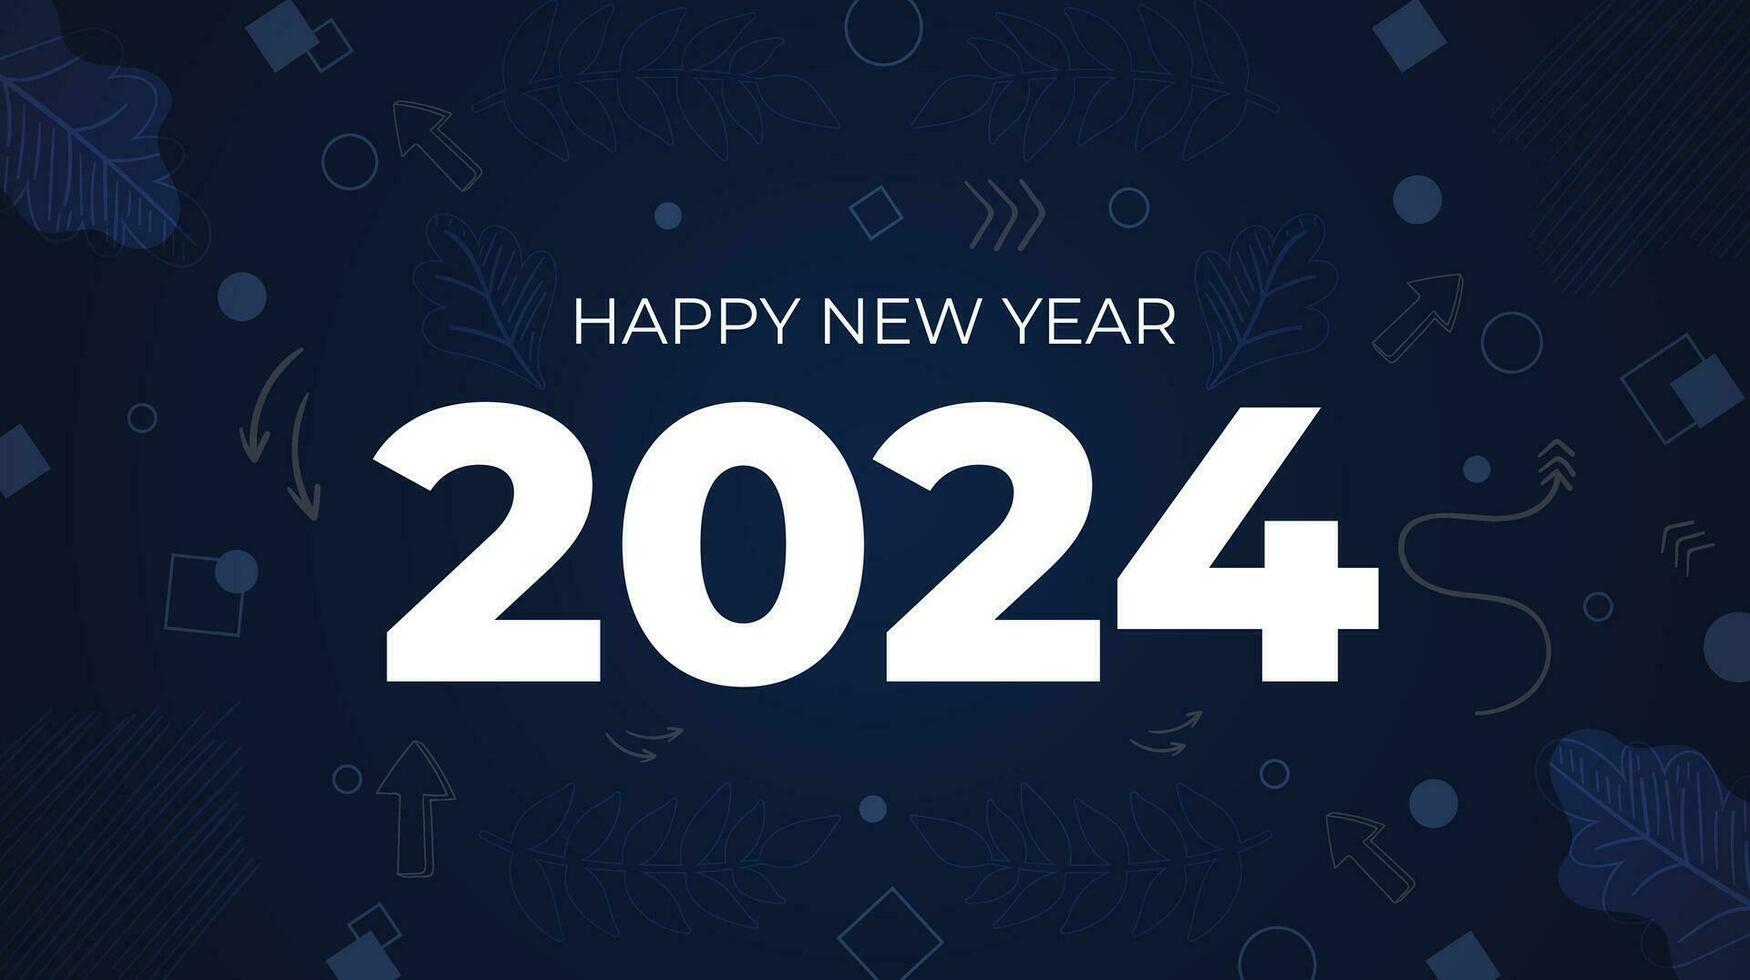 New Year 2024 banner vector